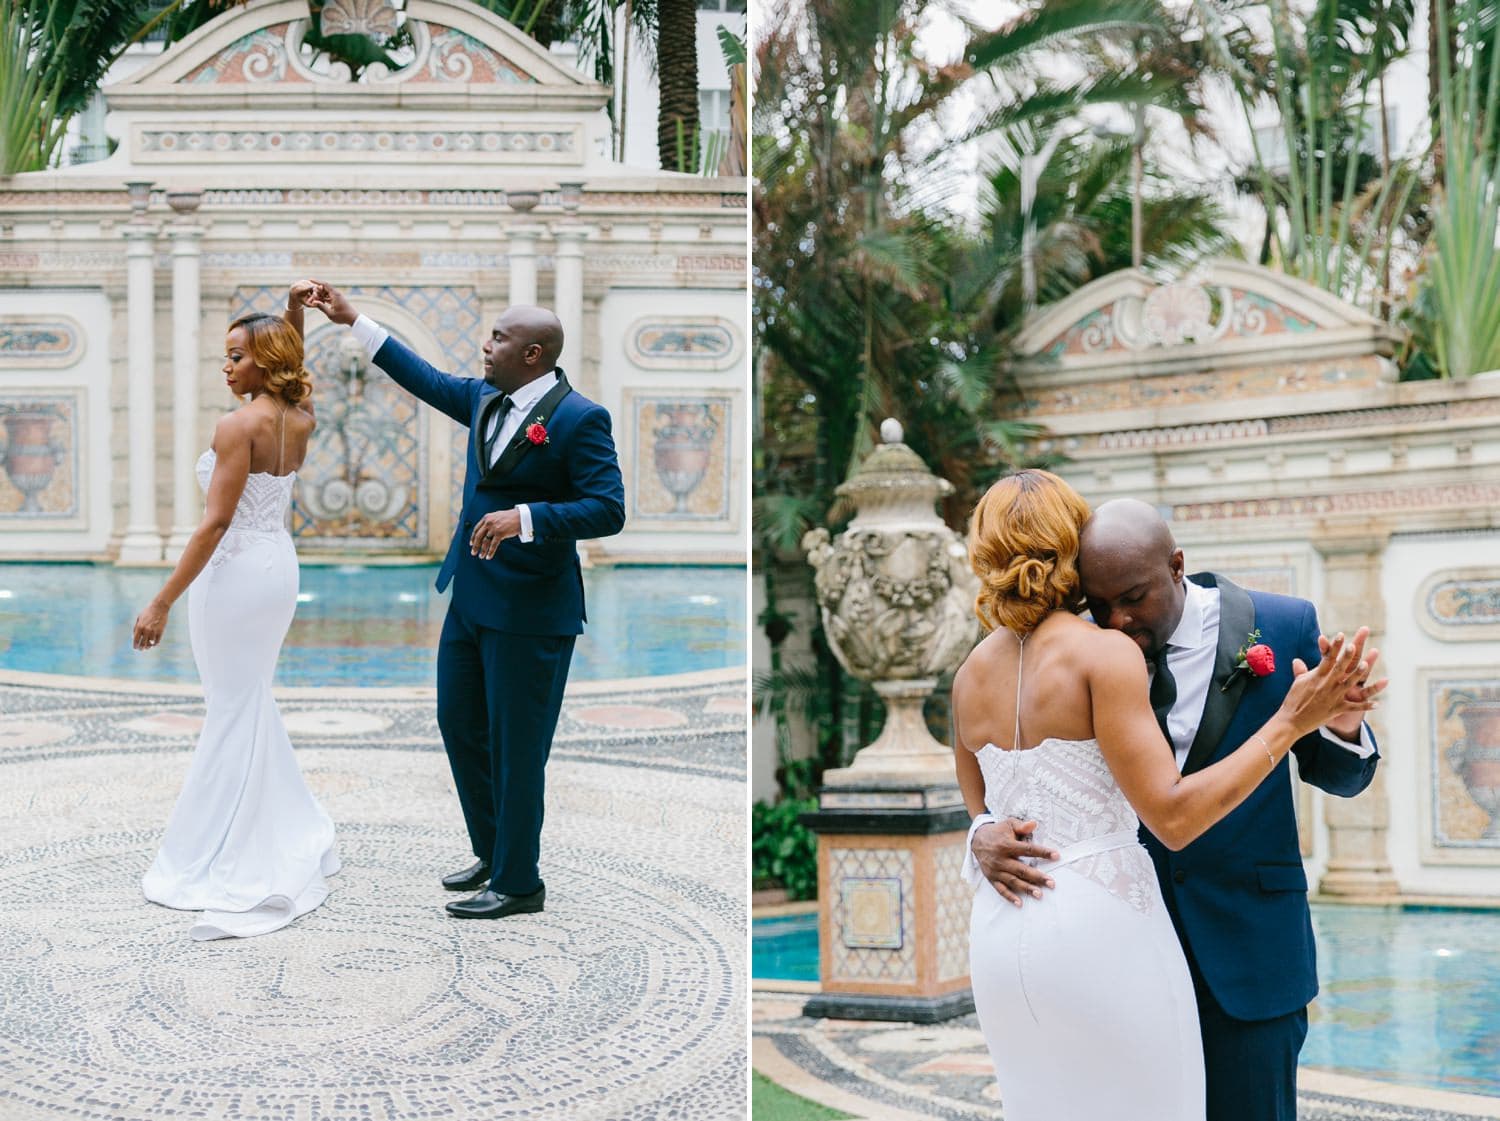 Wedding at The Versace Mansion 